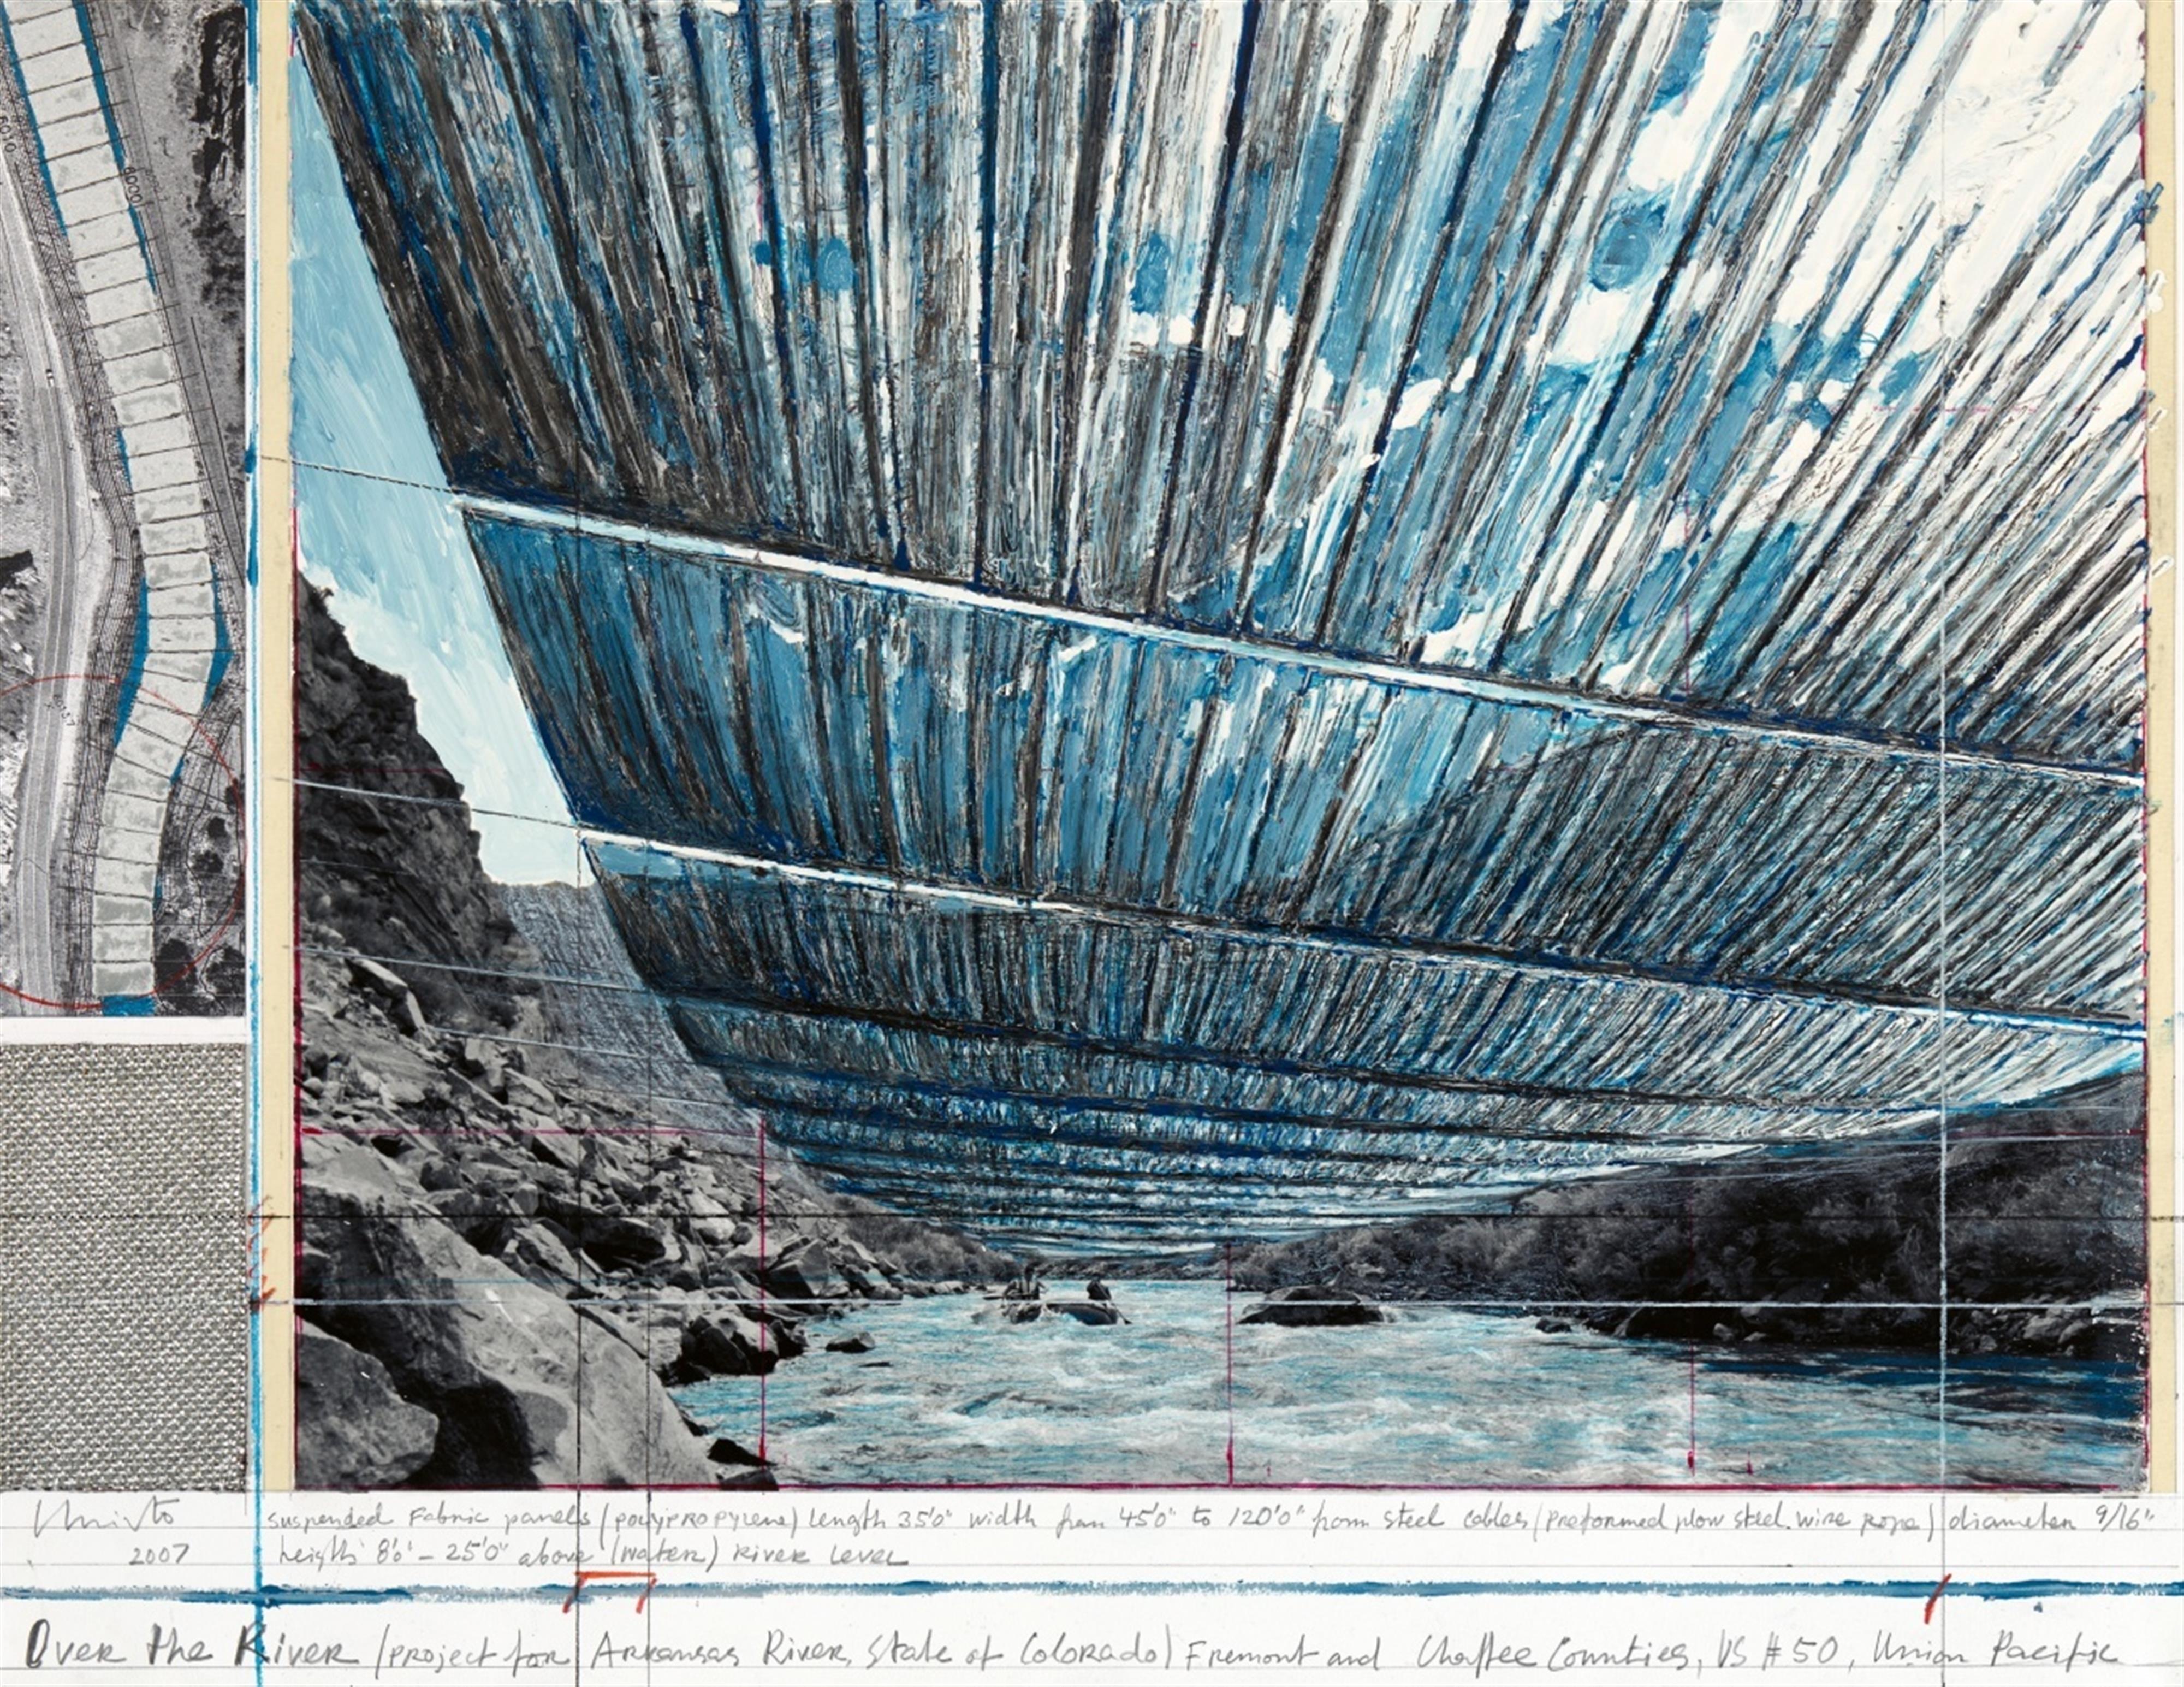 Christo - Over the river (Project for Arkansas River, State of Colorado) - image-1